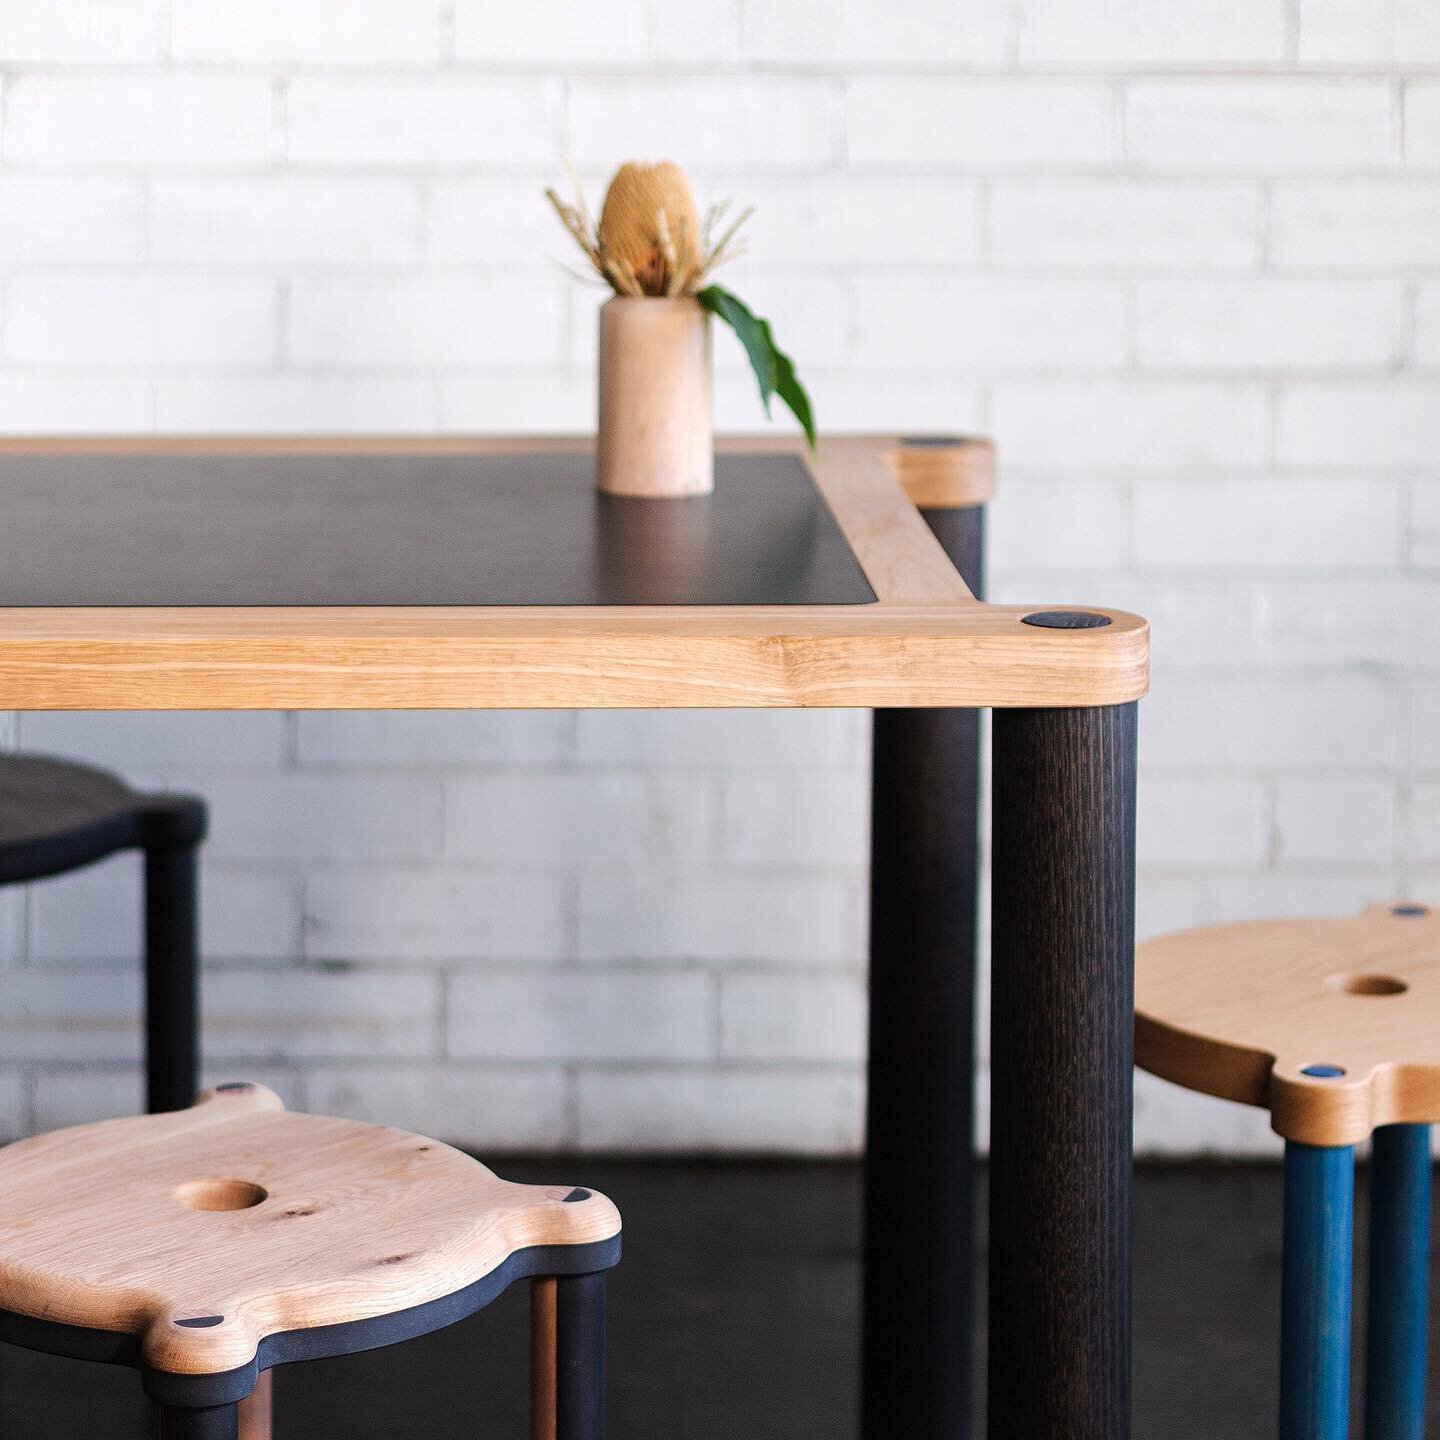 We&rsquo;re loving this stylish dining table with a Paperock SOLID top from Newcastle based furniture and interior designers @redblockdesign - feel free to order one from their website! 📷 @edwinajillrichards #australiandesign #australianfurniture #a